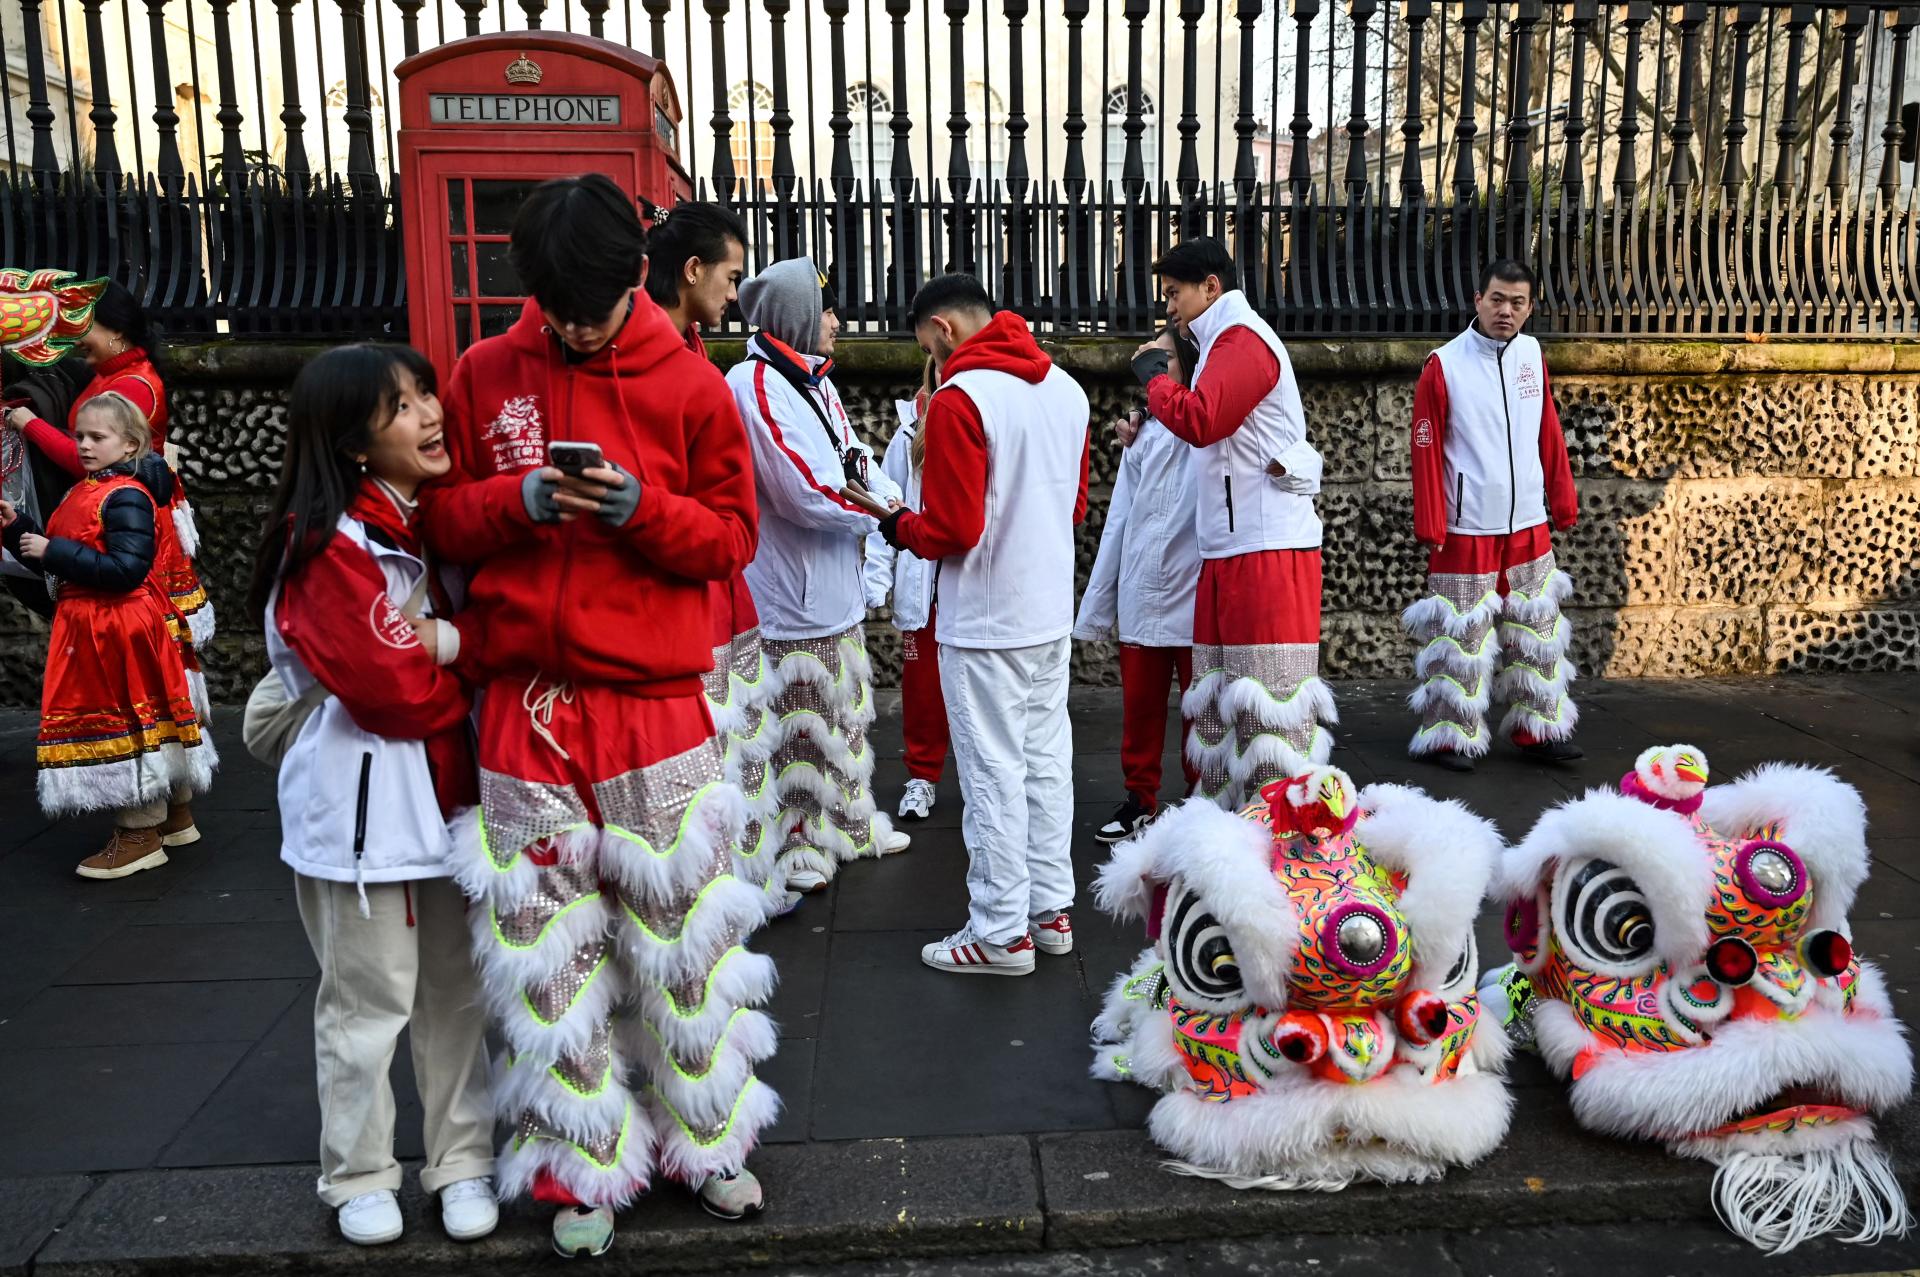 Preparations for the parade celebrating the Chinese Lunar New Year of the Rabbit, in central London, on January 22, 2023.